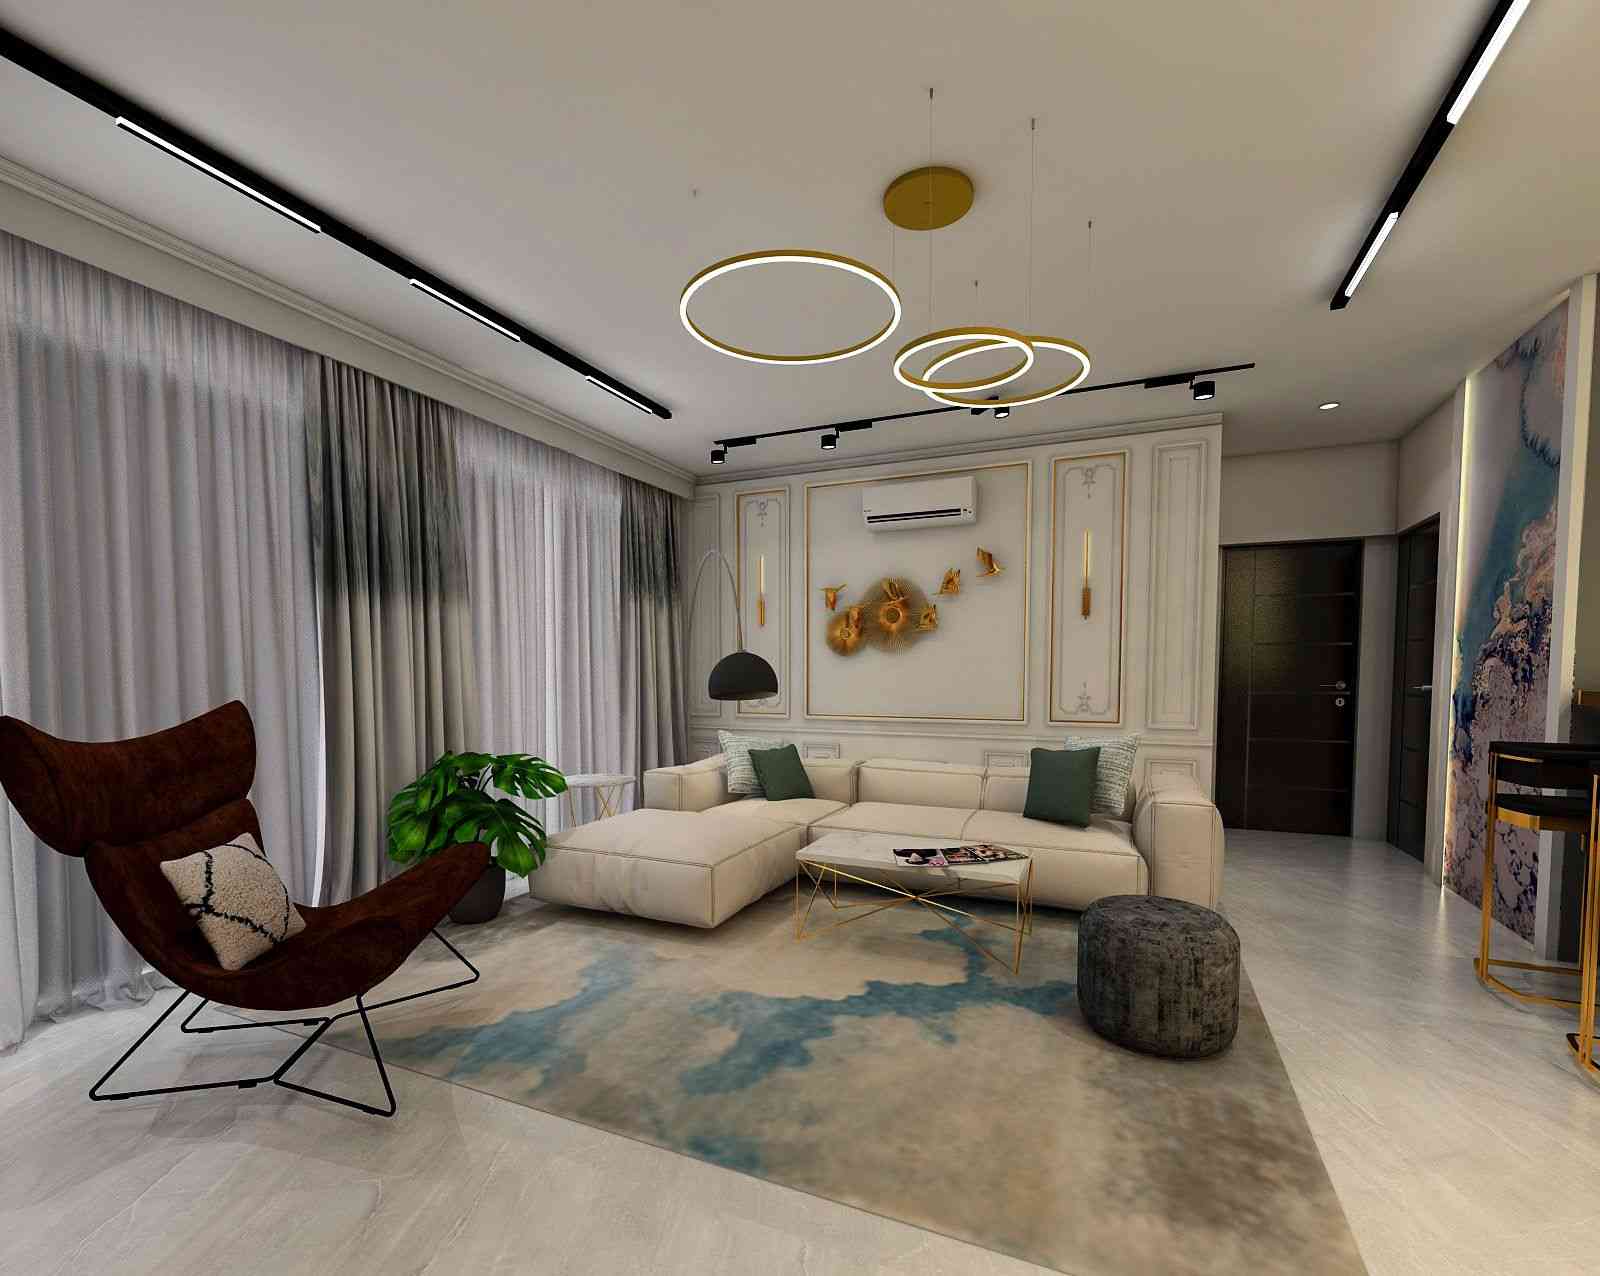 Modern Spacious Living Room Design With Simple Interiors